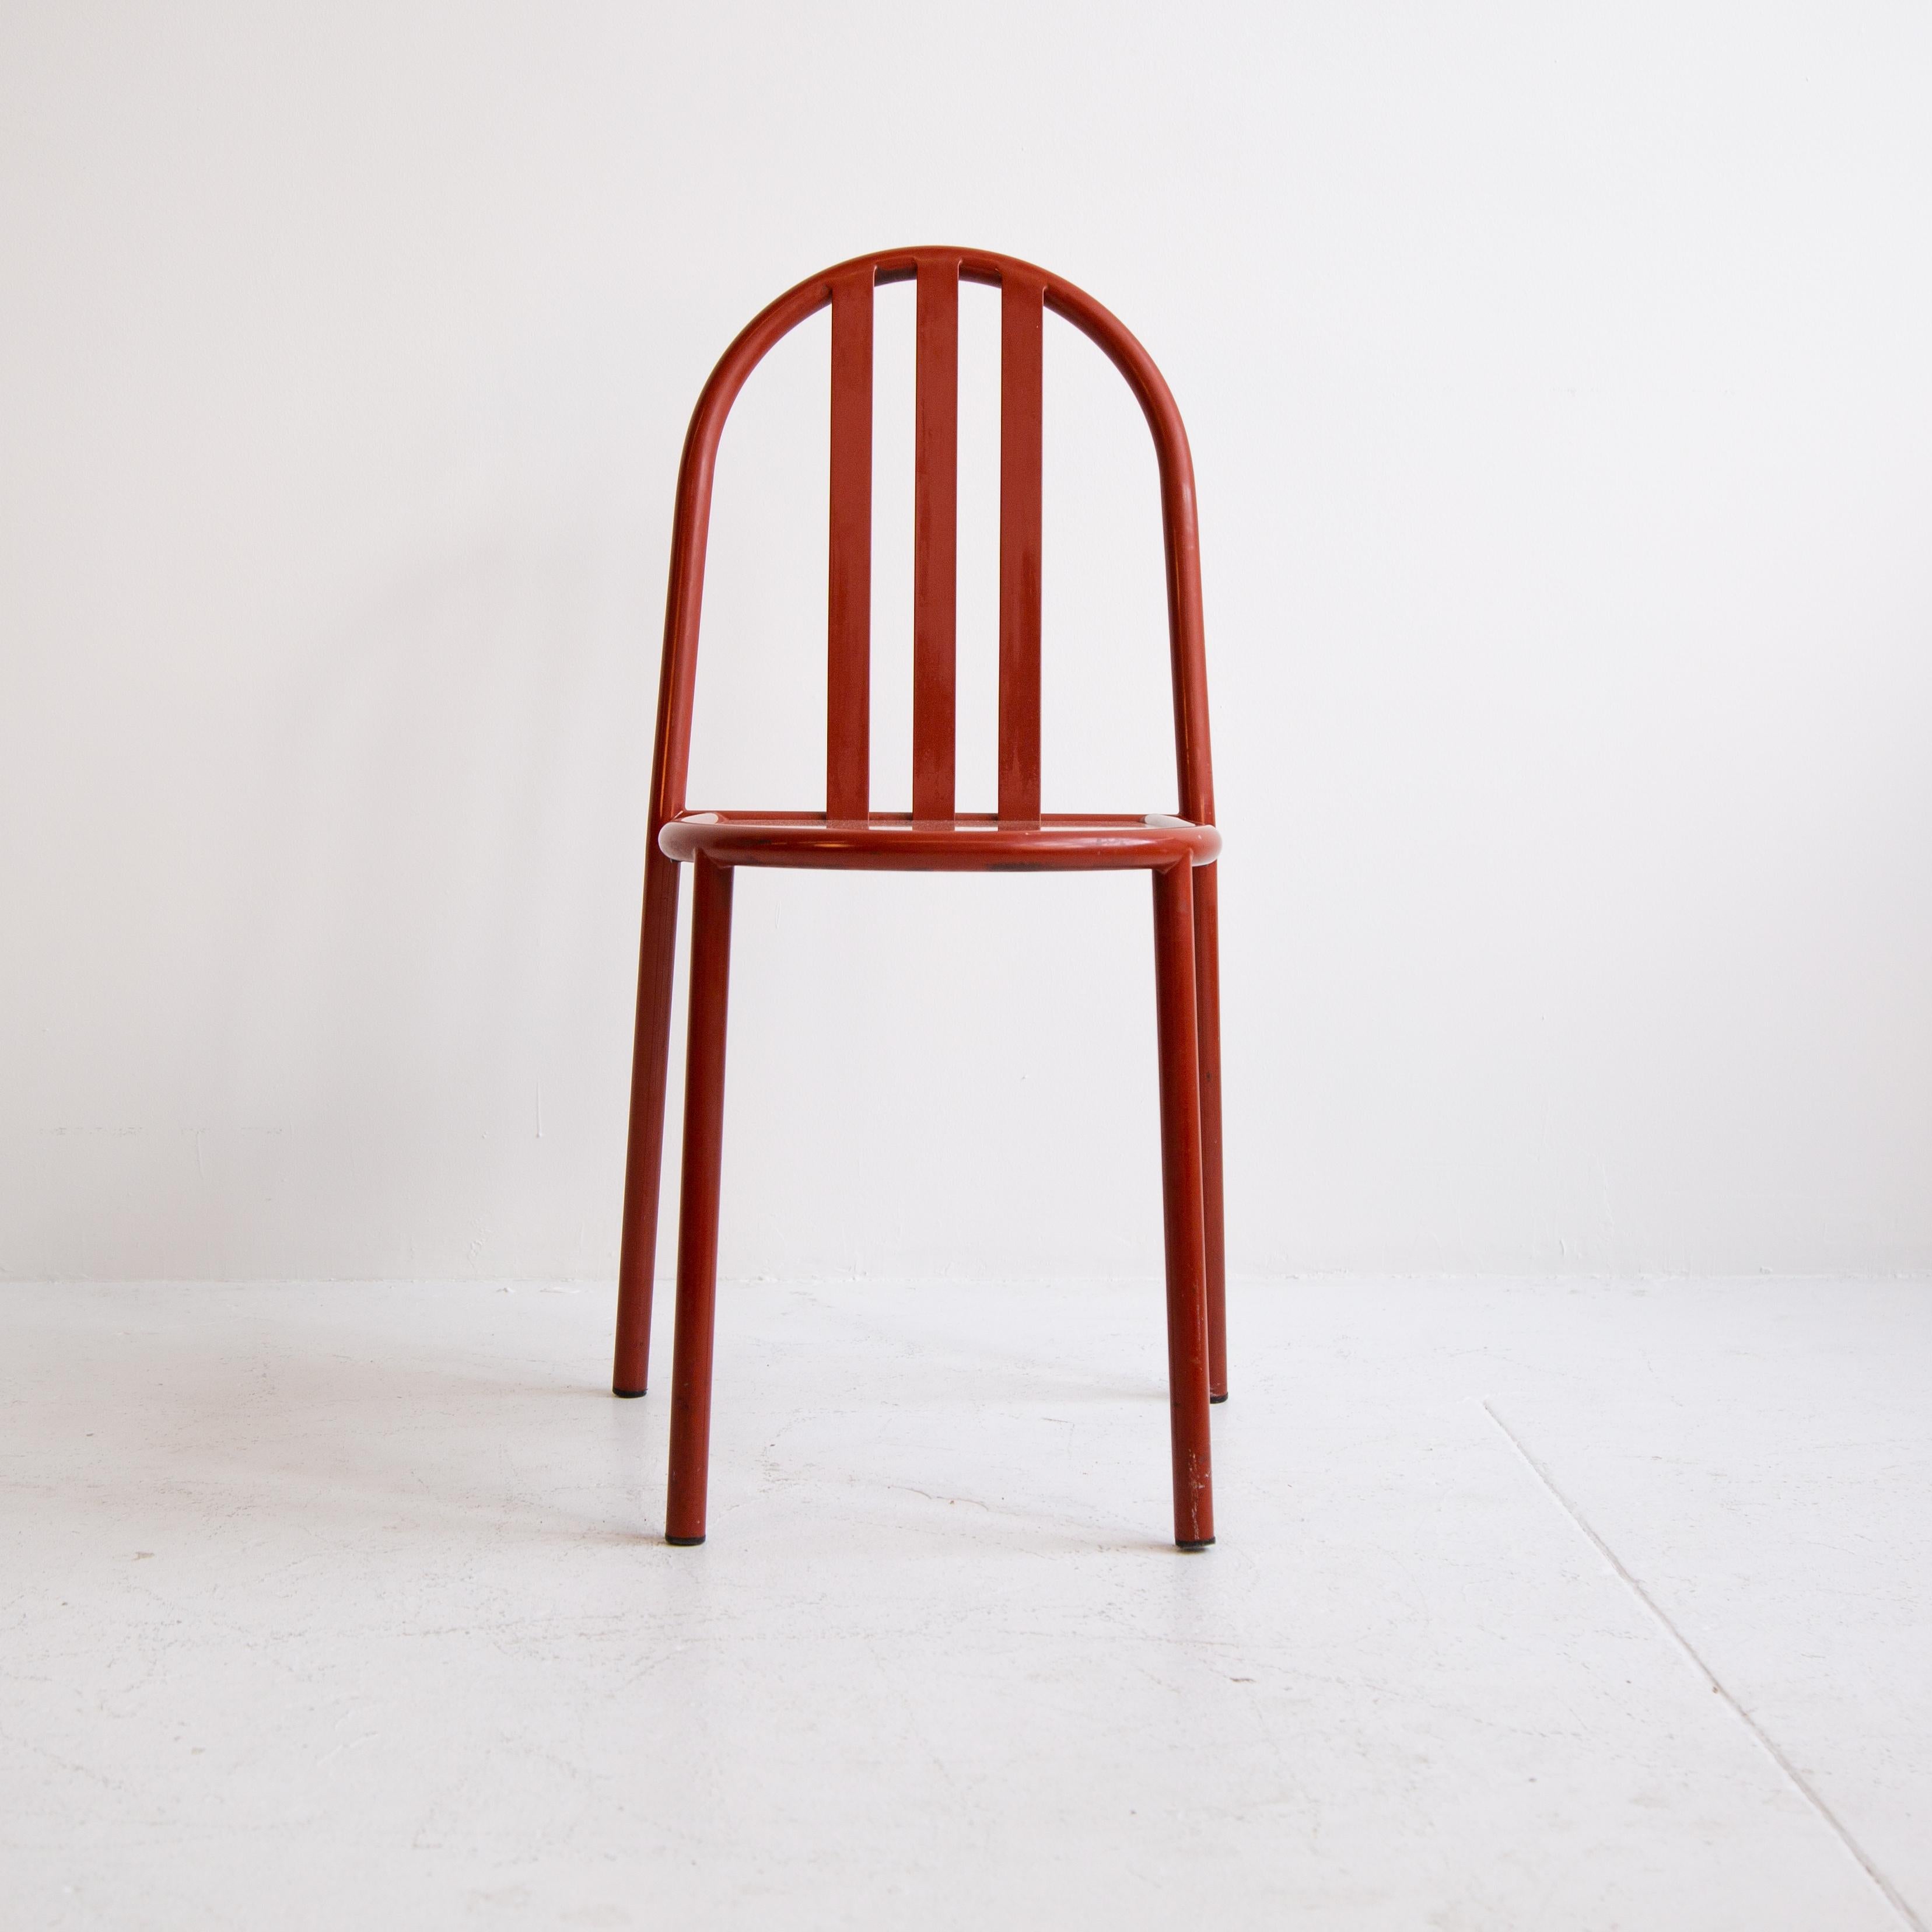 A vintage Mallet-Stevens 'Model 222' dining chair featuring a bent tubular steel frame and vibrant red powder coat finish. The back supports and seat surface are cut from steel sheet. This Minimalist chair, originally manufactured in France, is the